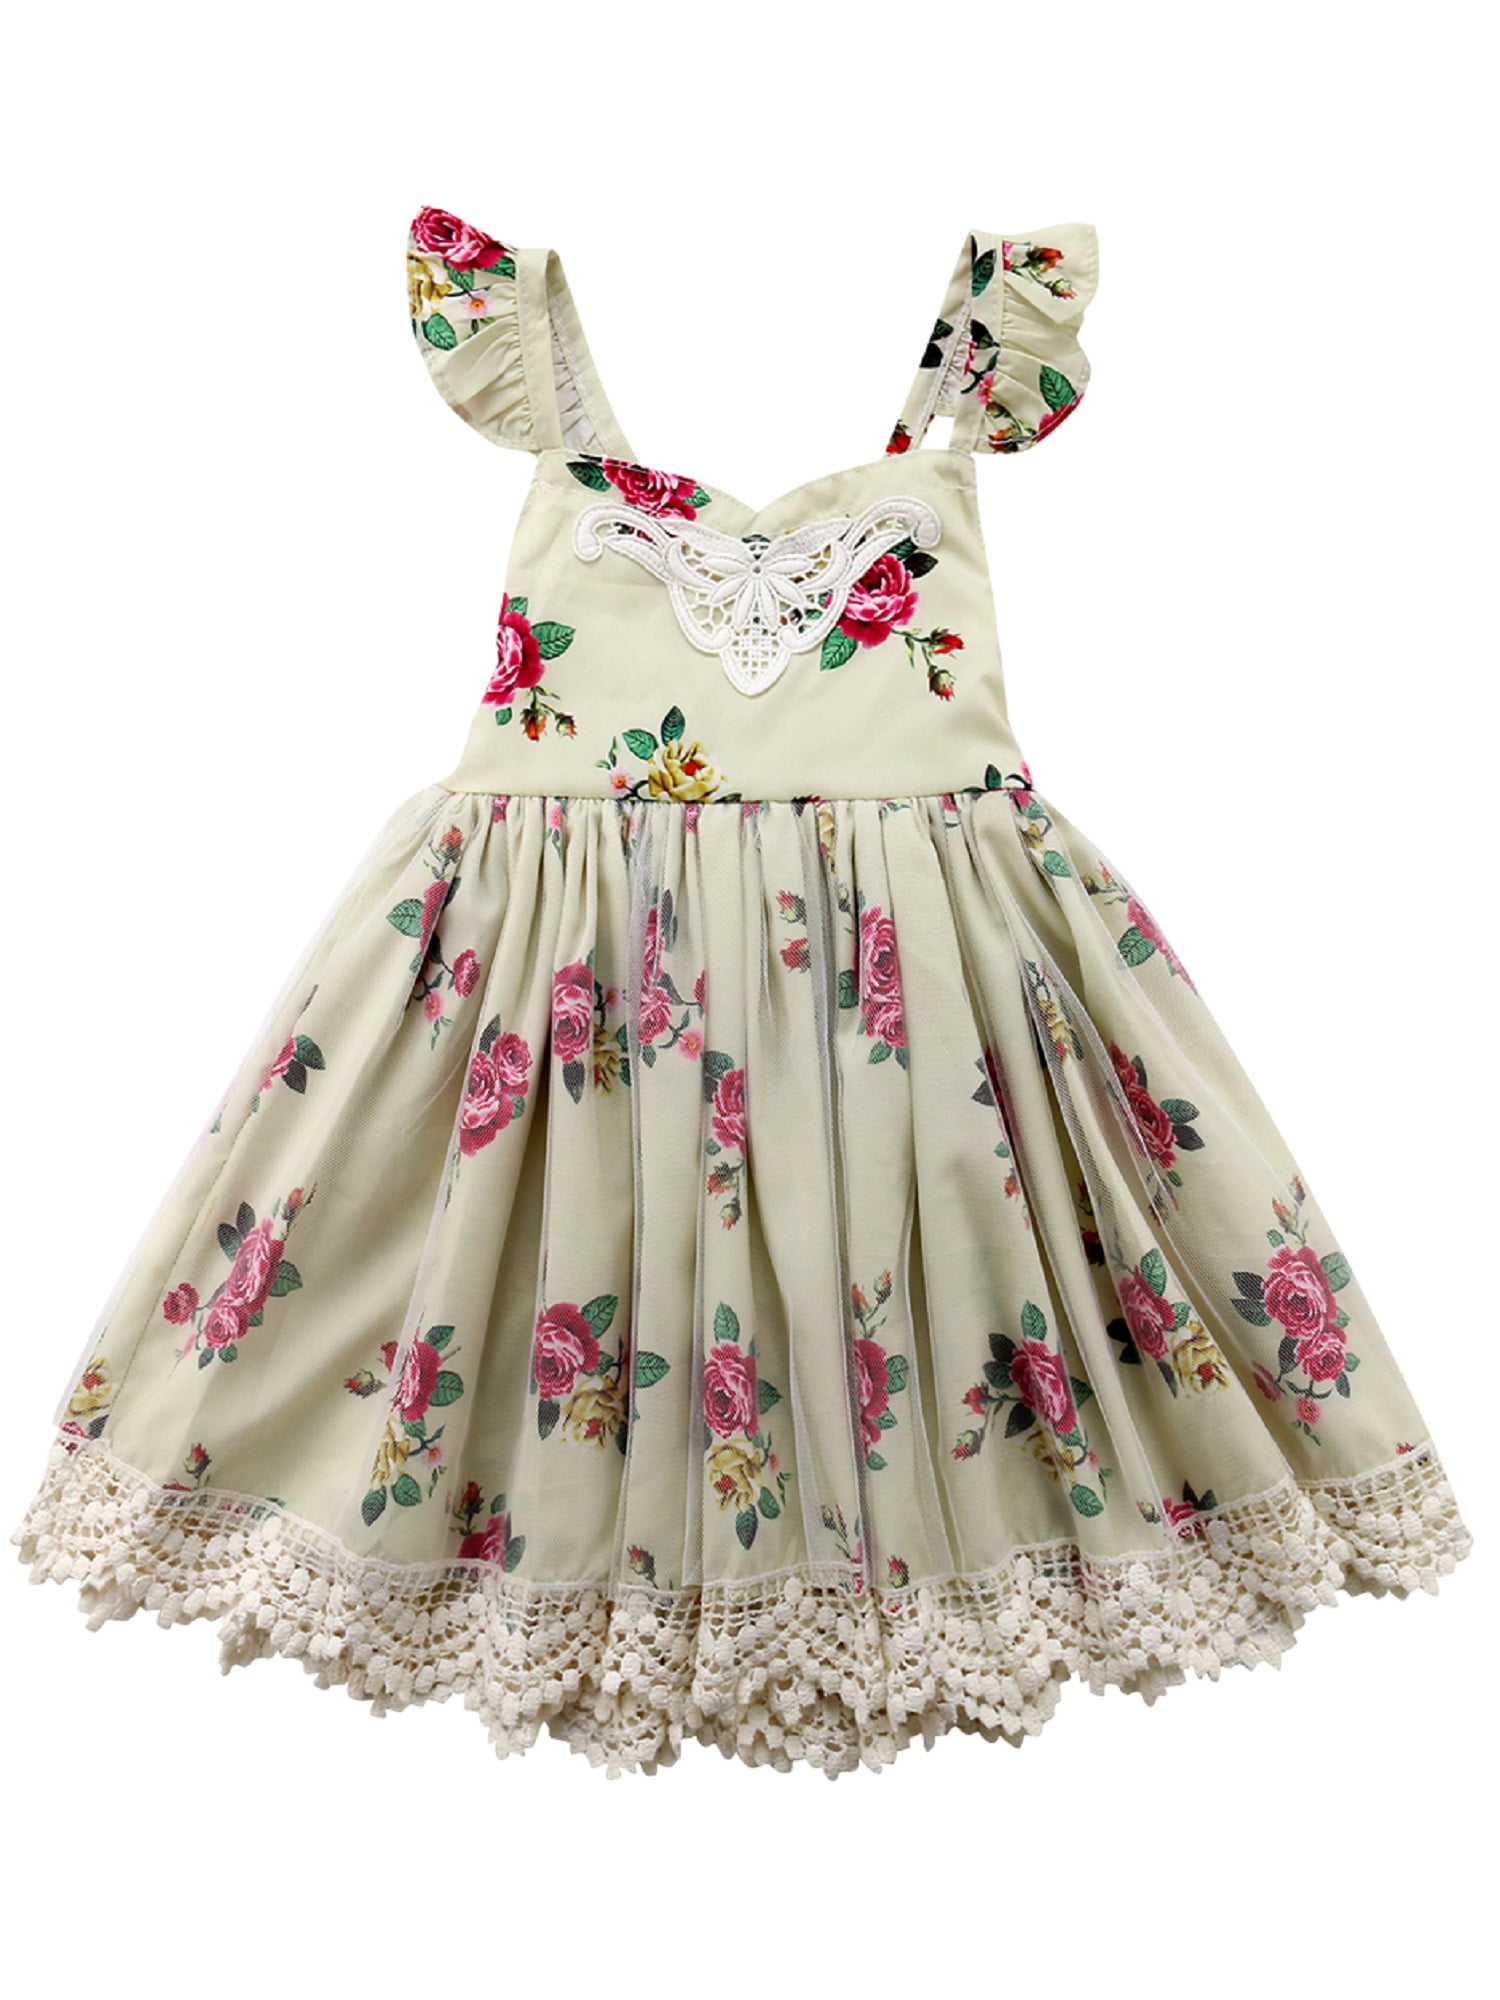 Girls Baby Dress Floral Party Casual Summer Formal Long/Short Sleeve 